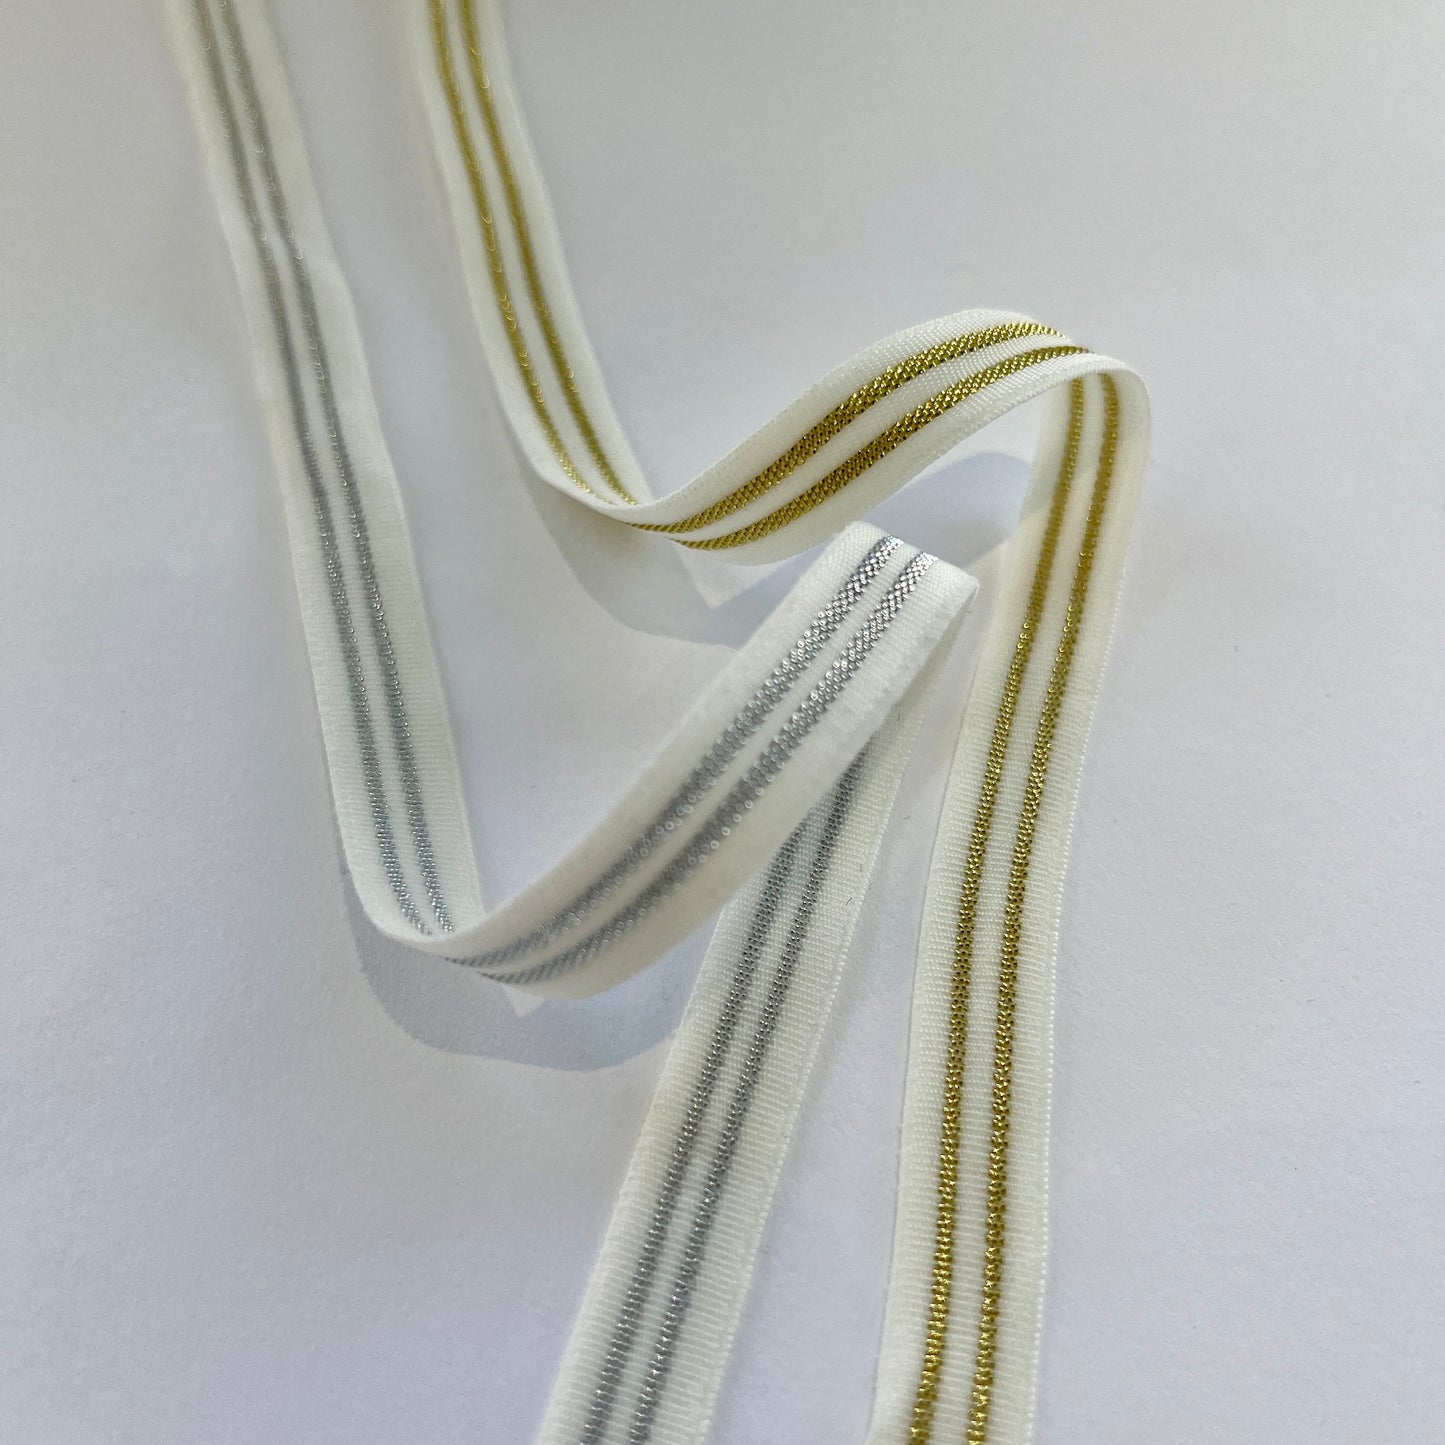 10mm Wide Sporty Stripe Lurex Elastics in ivory with gold stripe and white with silver stripe